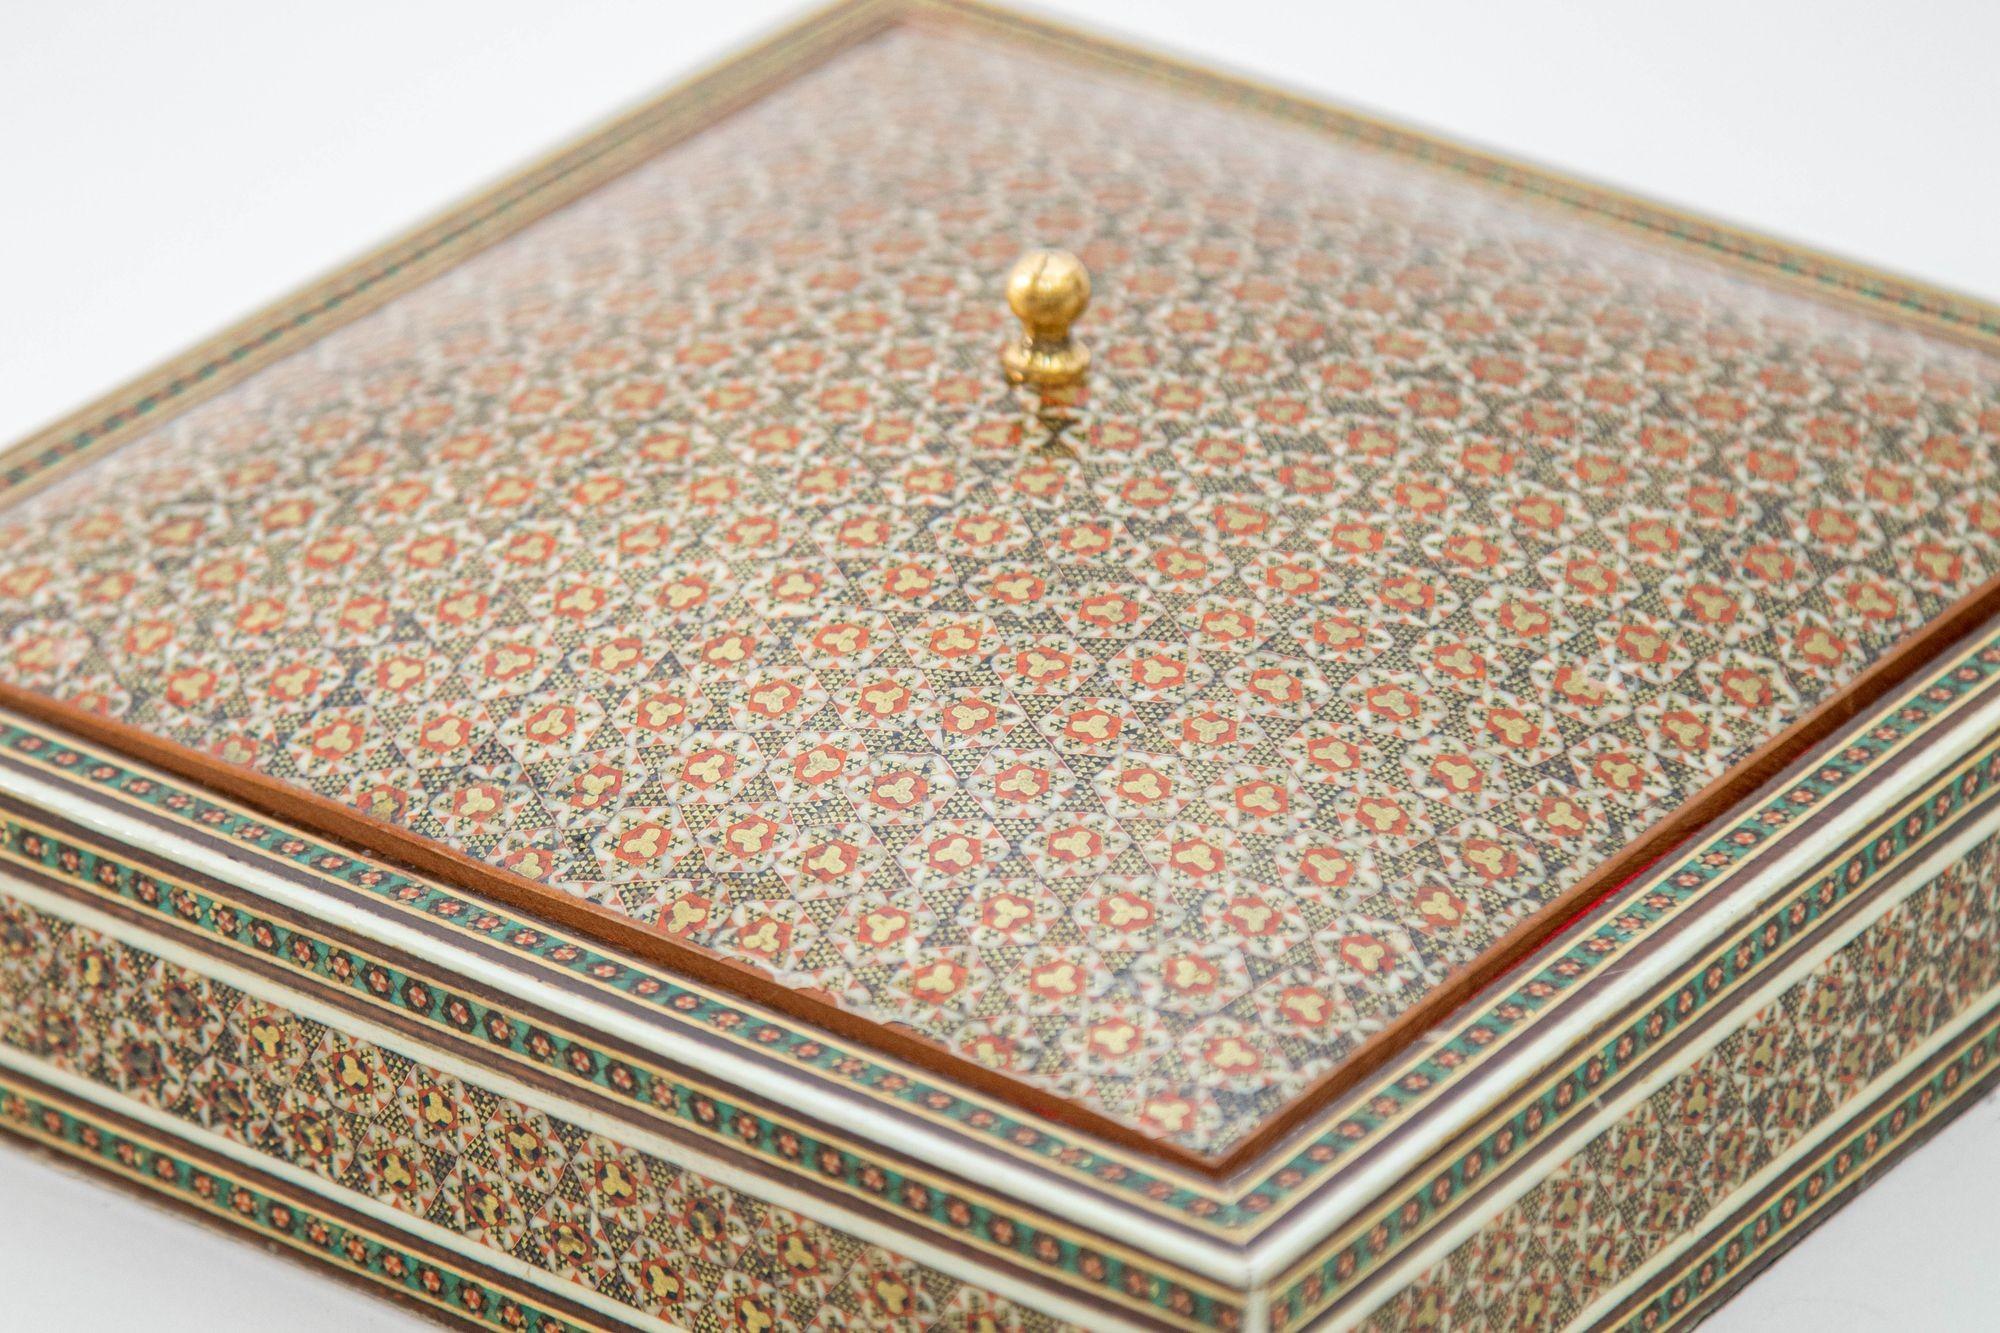 1950's Anglo Indian, Indo Persian style micro mosaic inlaid jewelry box with lid.
Large vintage intricate inlaid middle Eastern Persian style box with floral and geometric Islamic Moorish design in a rectangular form.
Moorish design bone inlay and